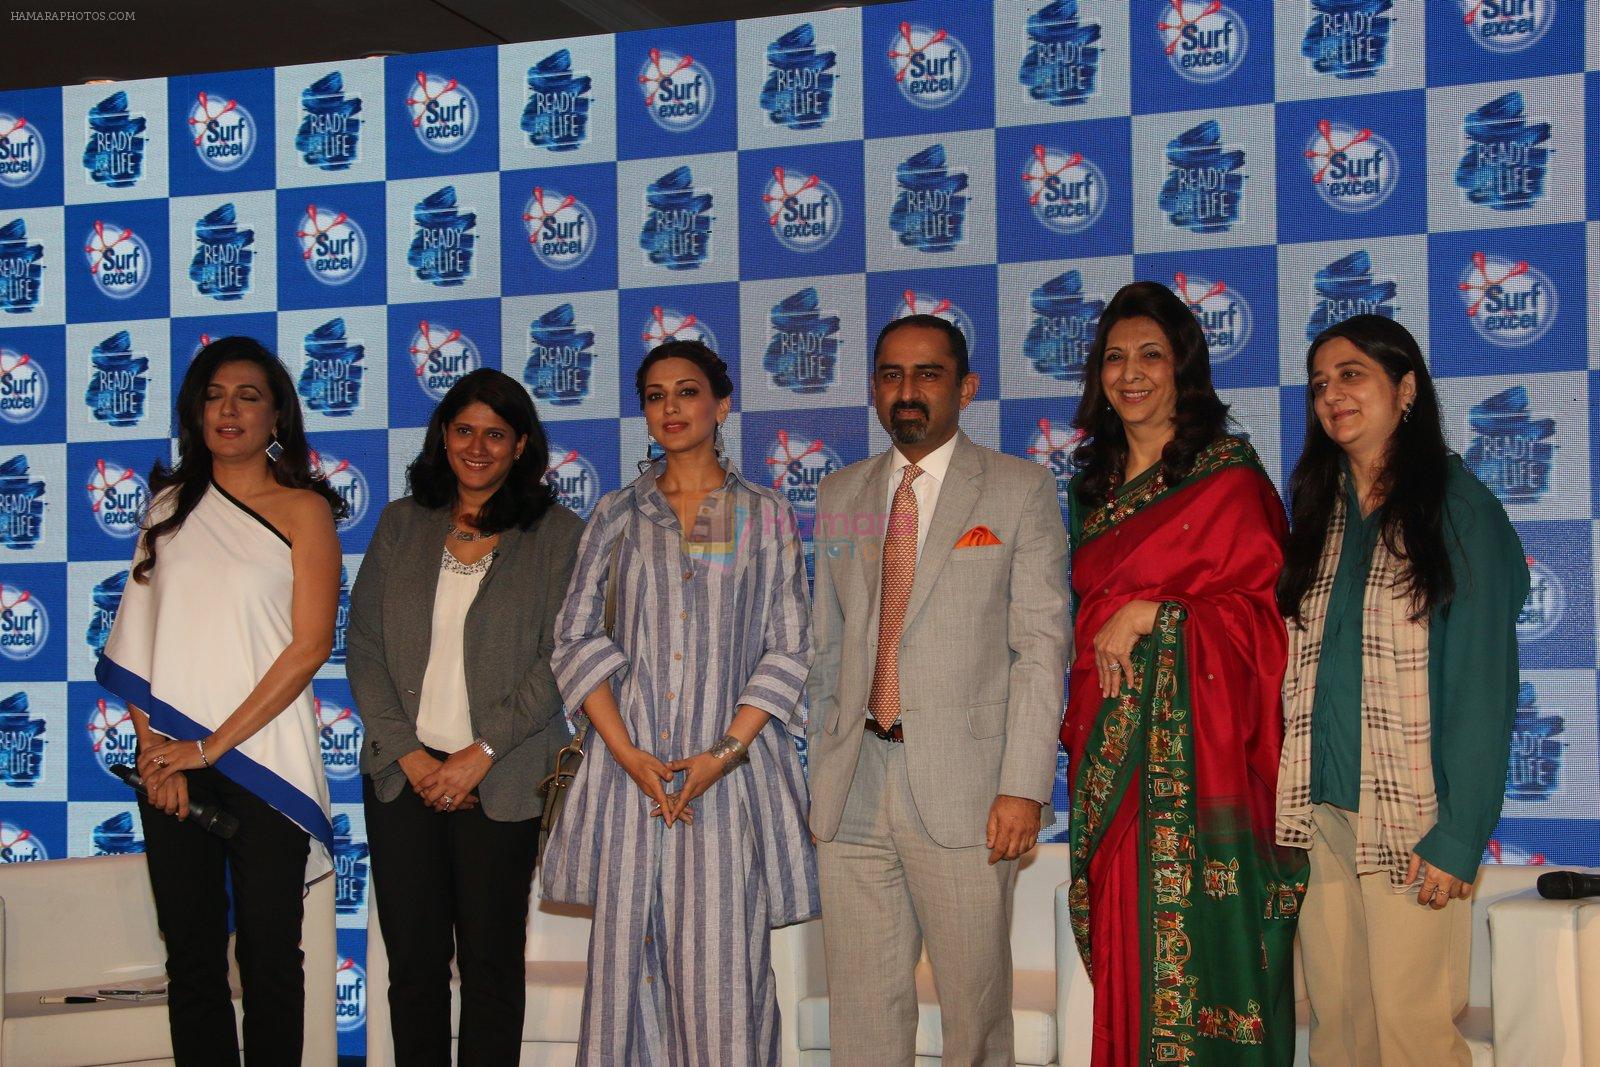 Mini Mathur and Sonali Bendre at Surf Excel promotions on 21st April 2016